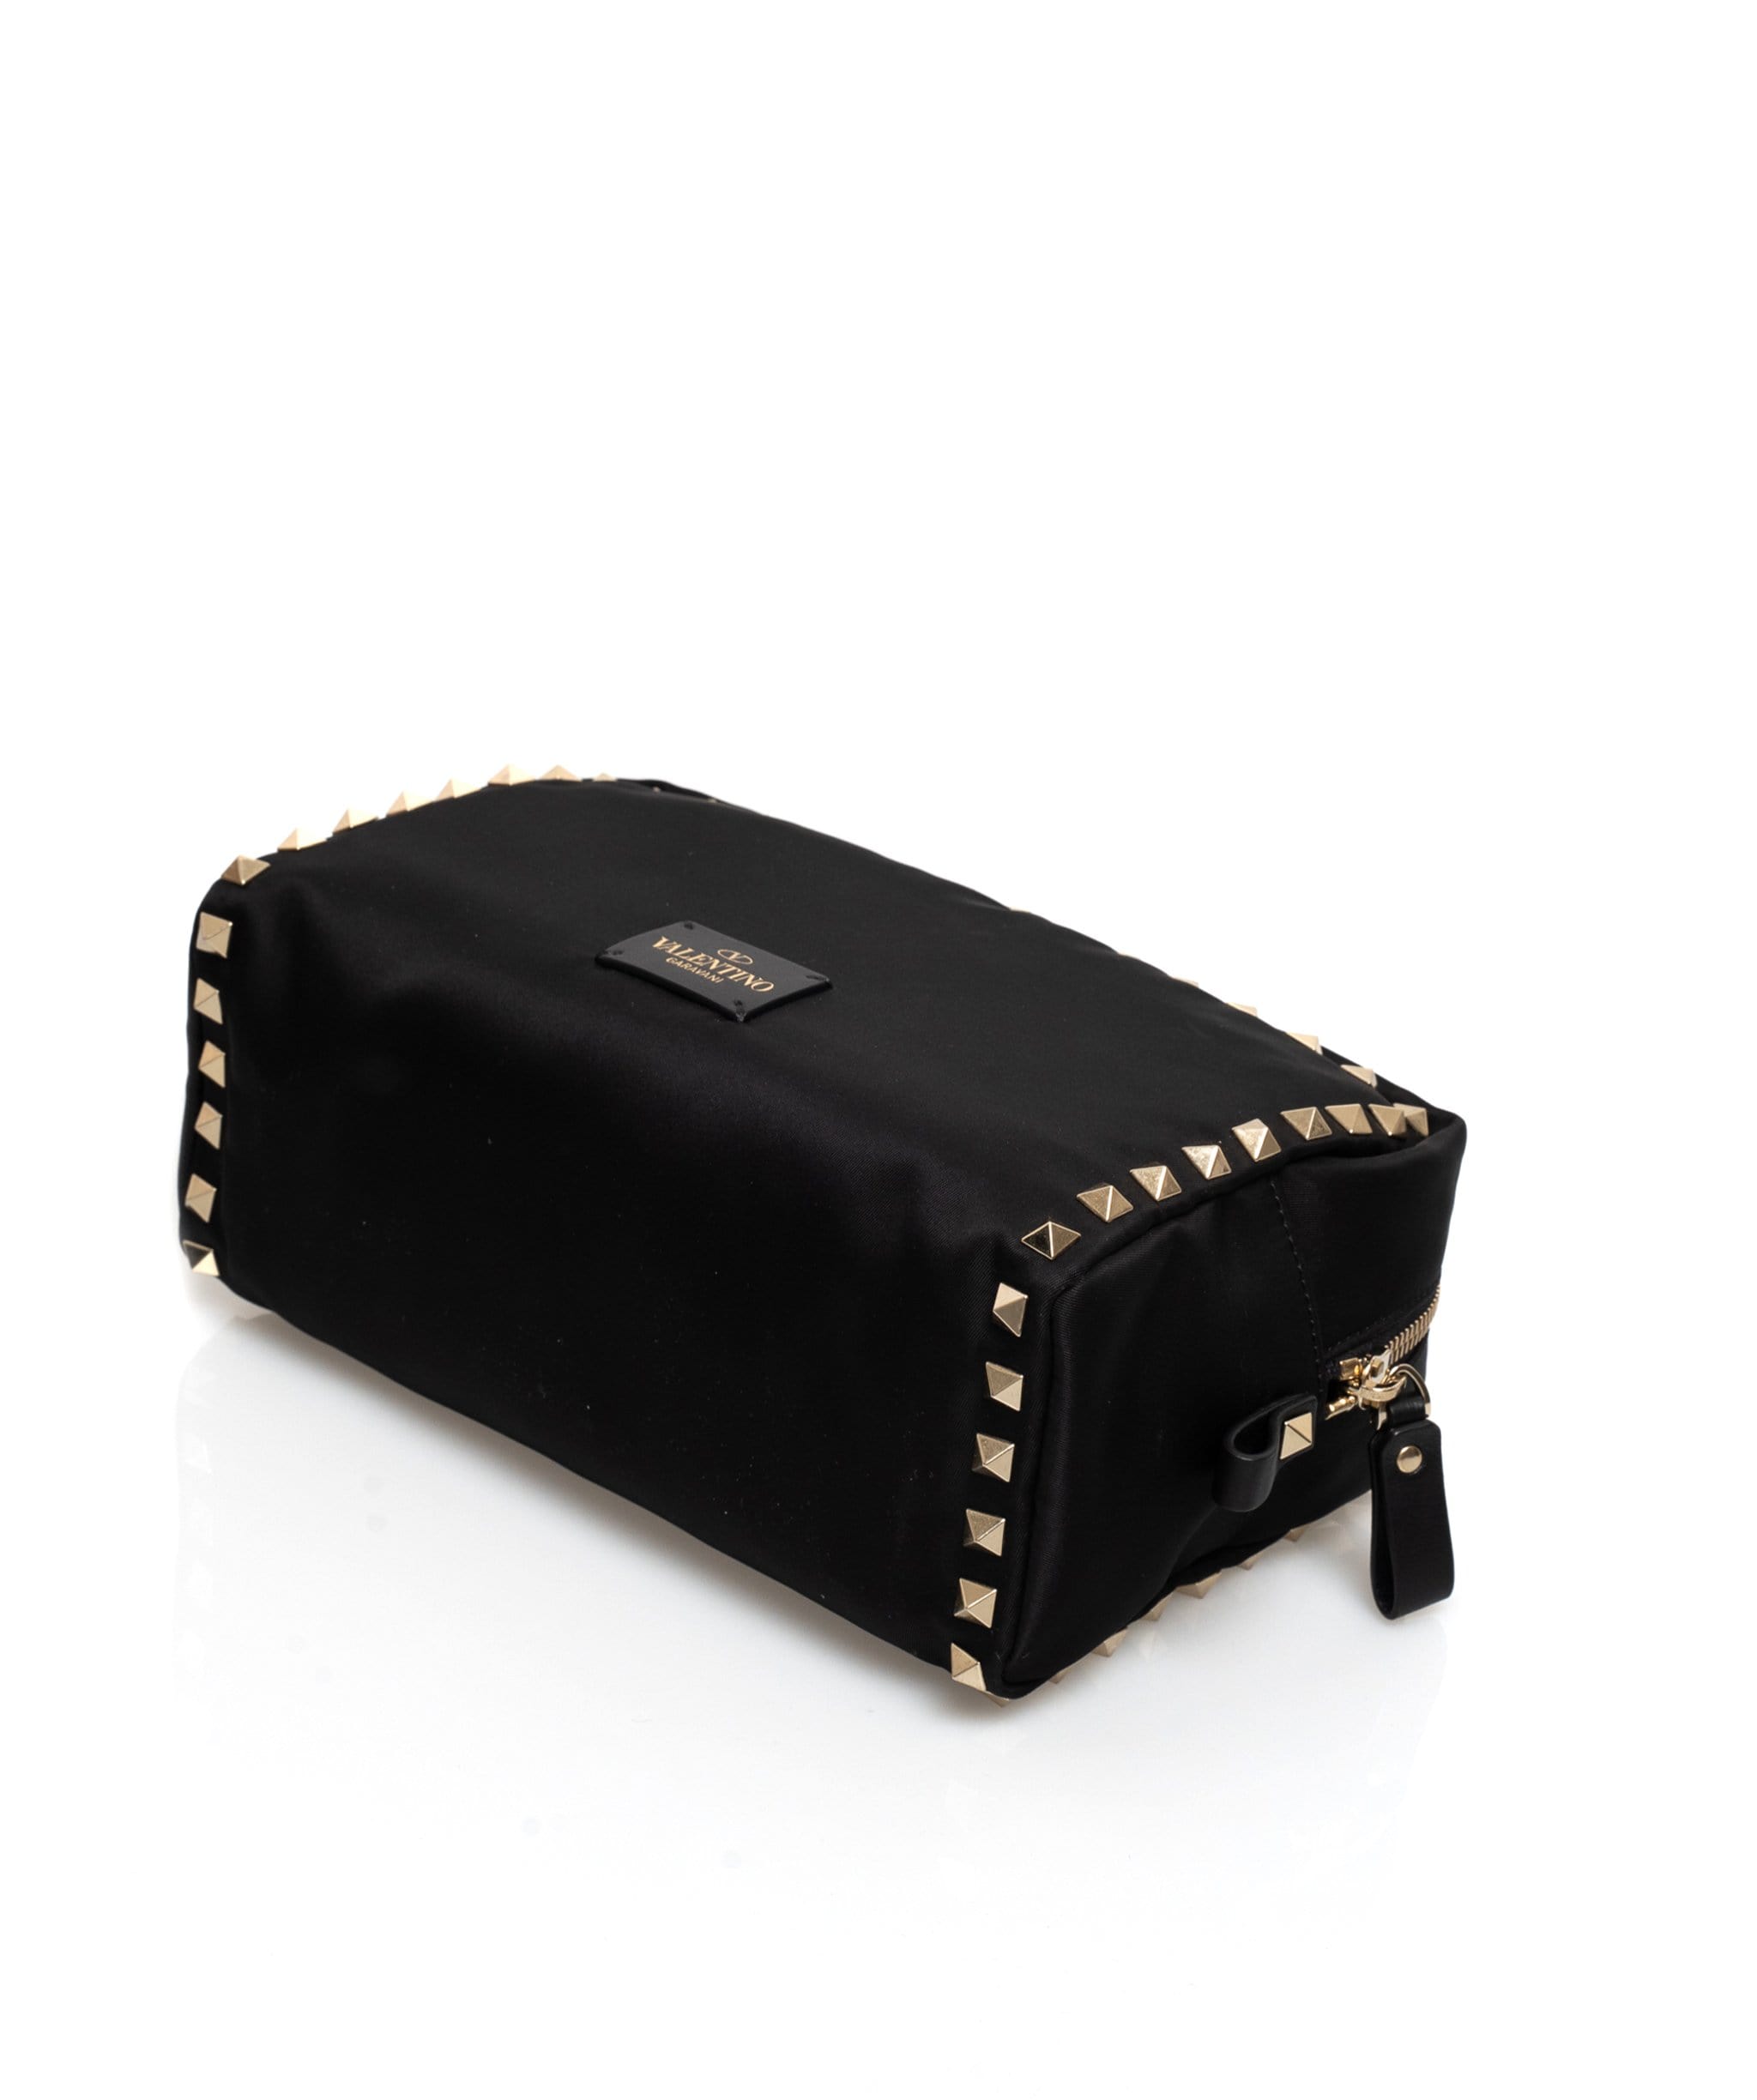 Valentino Valentino black nylon pouch with gold studded detailing MW2090